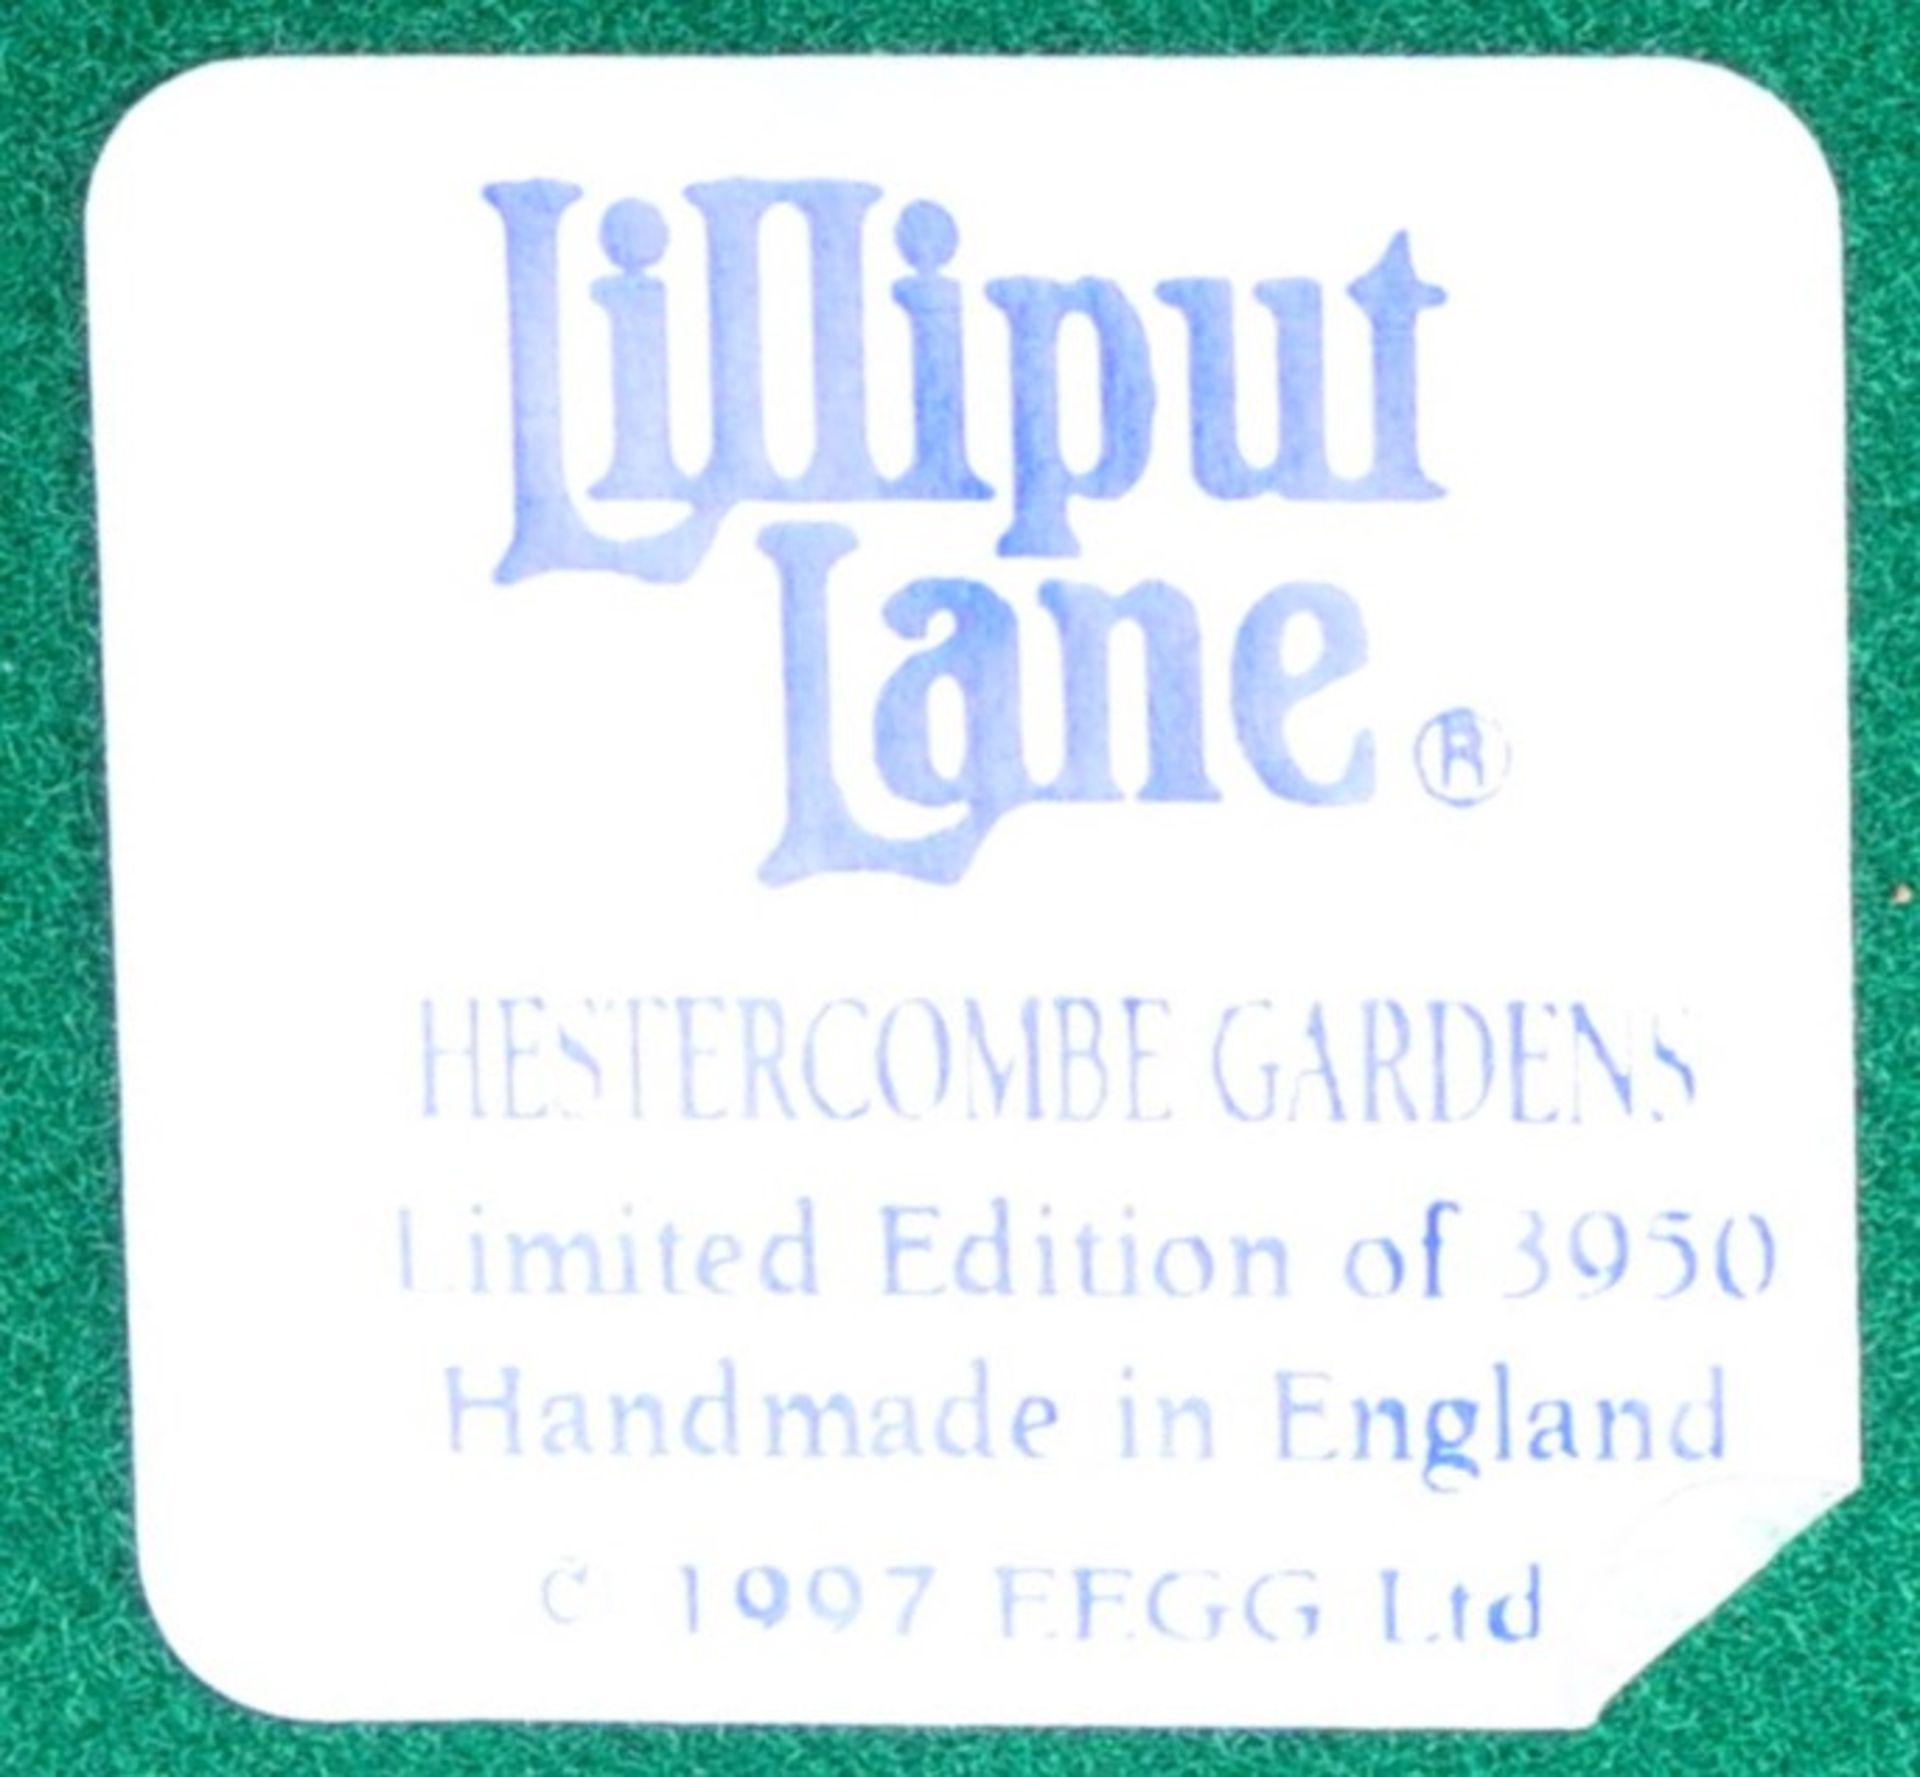 COLLECTION OF VINTAGE LILLIPUT LANE ORNAMENENTS - Image 11 of 12